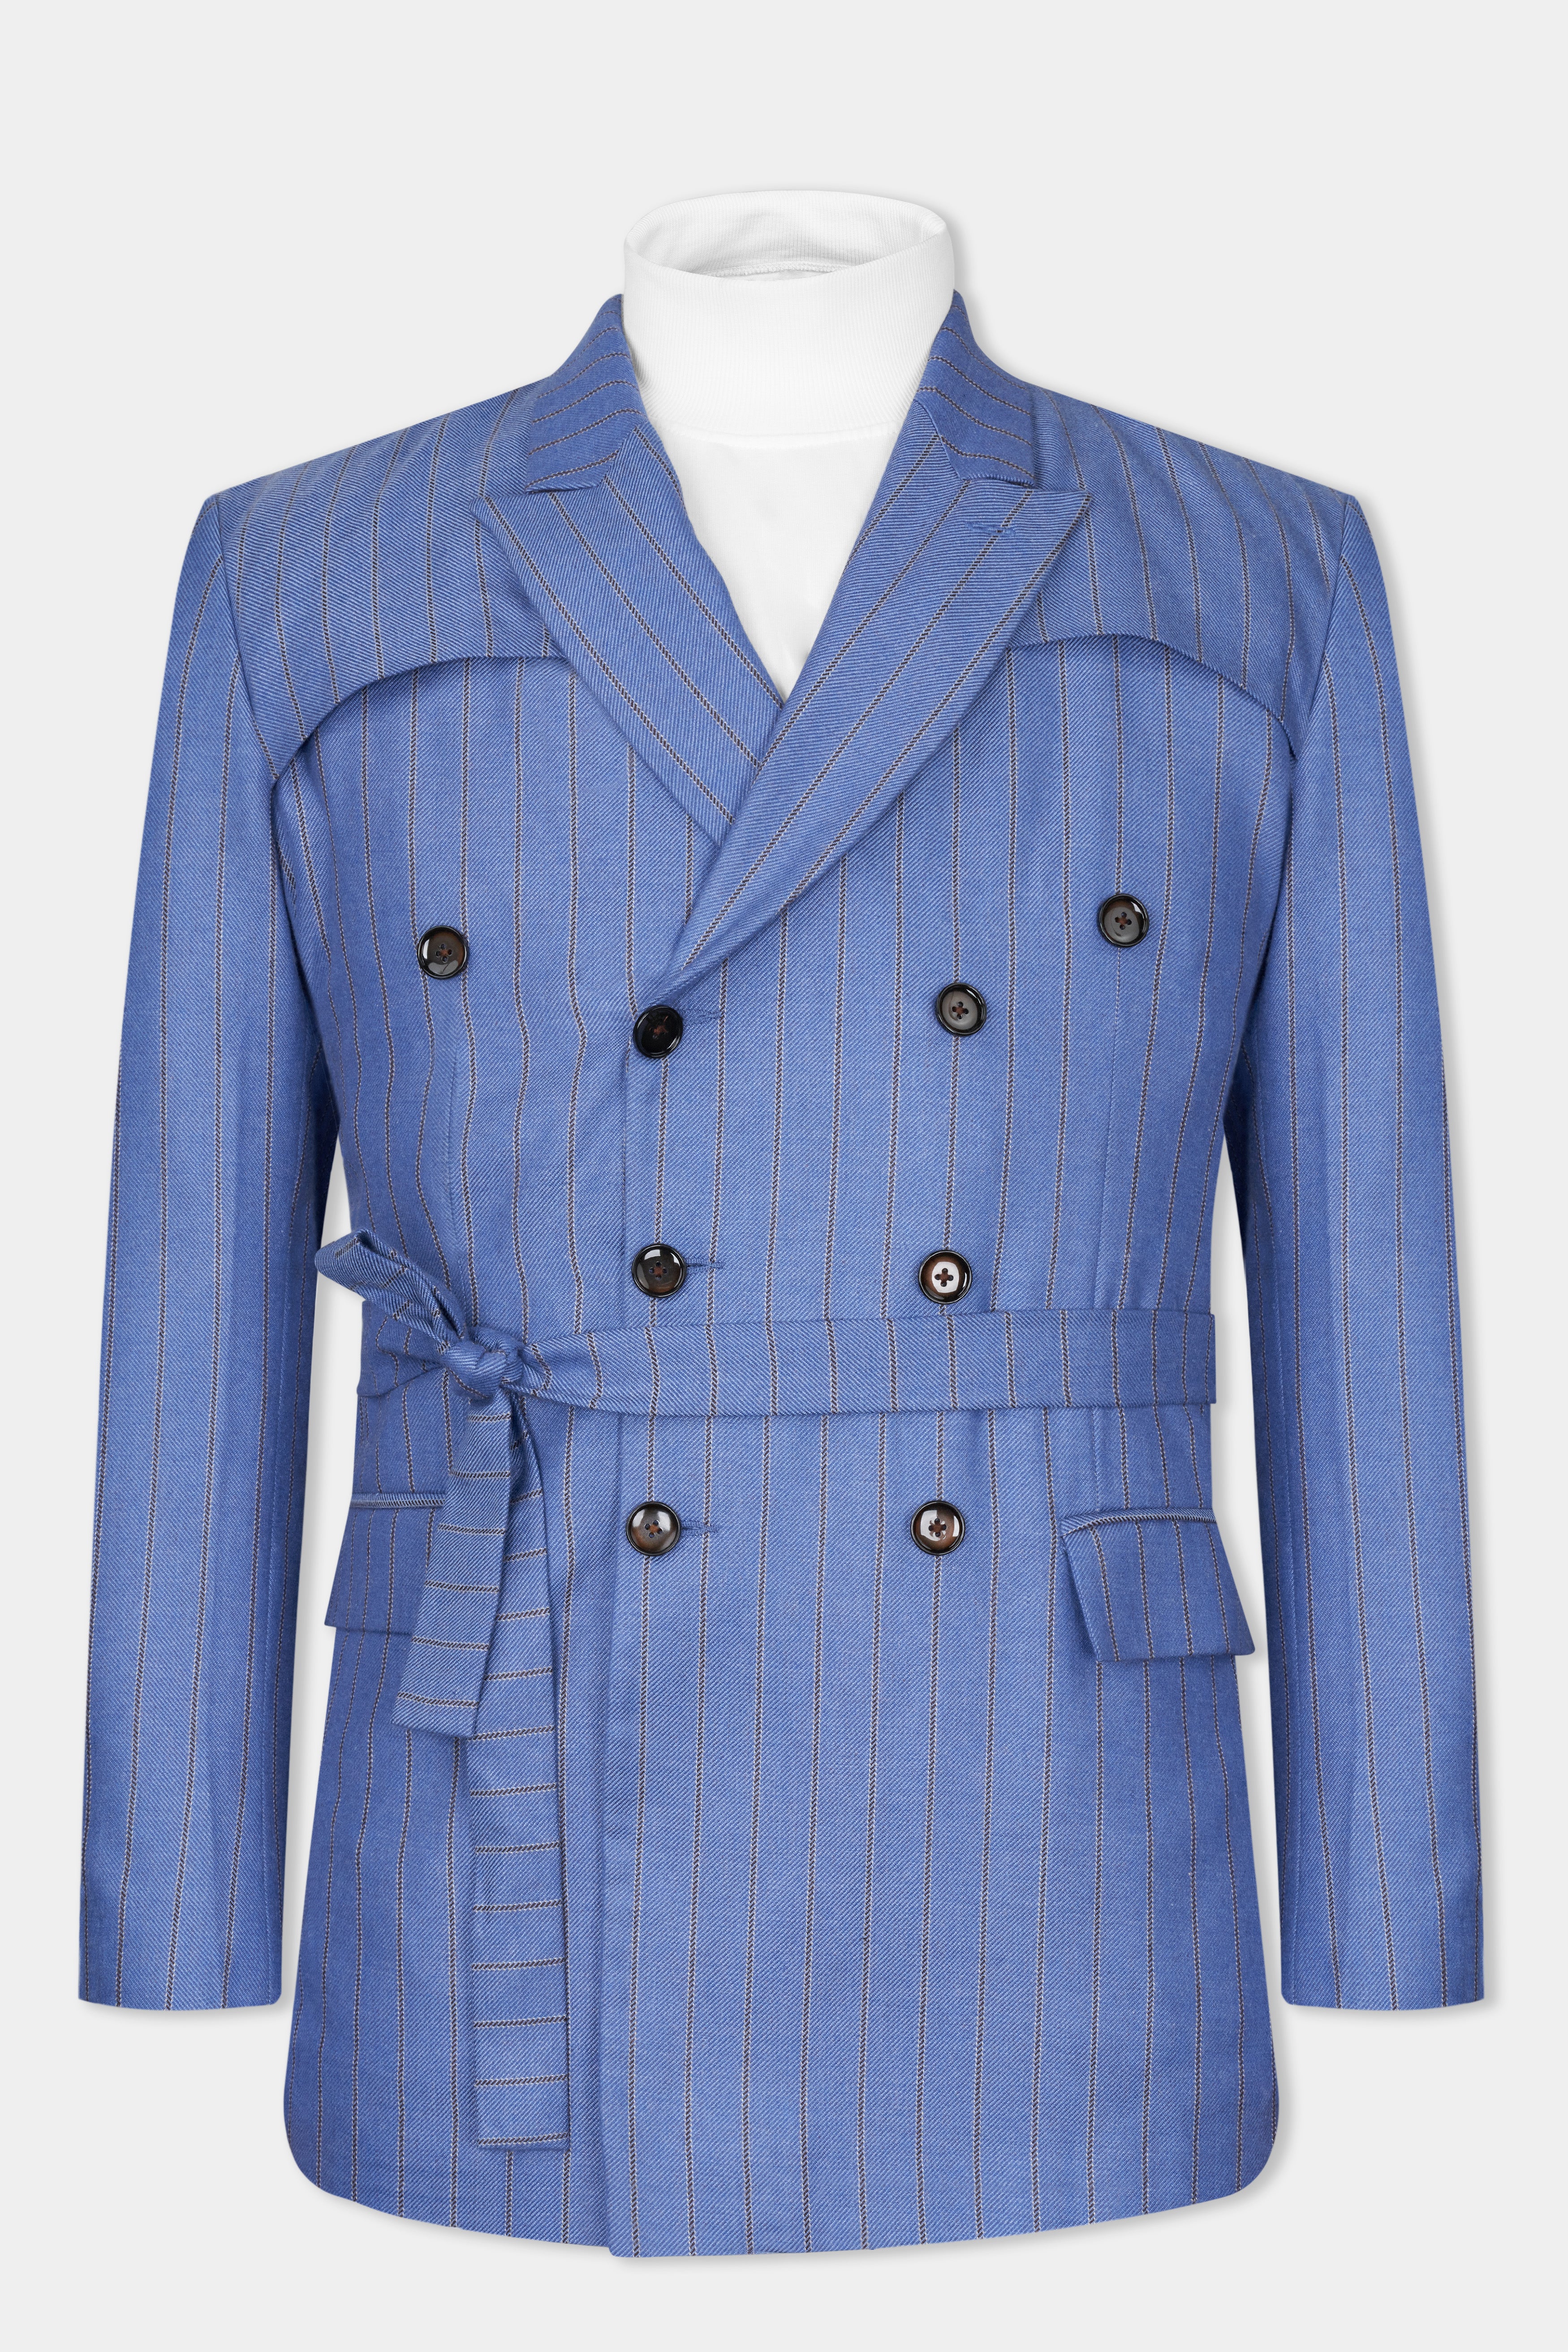 Chetwode Blue and Iroko Brown Striped Wool Rich Designer Blazer BL2769-DB-D35-36, BL2769-DB-D35-38, BL2769-DB-D35-40, BL2769-DB-D35-42, BL2769-DB-D35-44, BL2769-DB-D35-46, BL2769-DB-D35-48, BL2769-DB-D35-50, BL2769-DB-D35-52, BL2769-DB-D35-54, BL2769-DB-D35-56, BL2769-DB-D35-58, BL2769-DB-D35-60